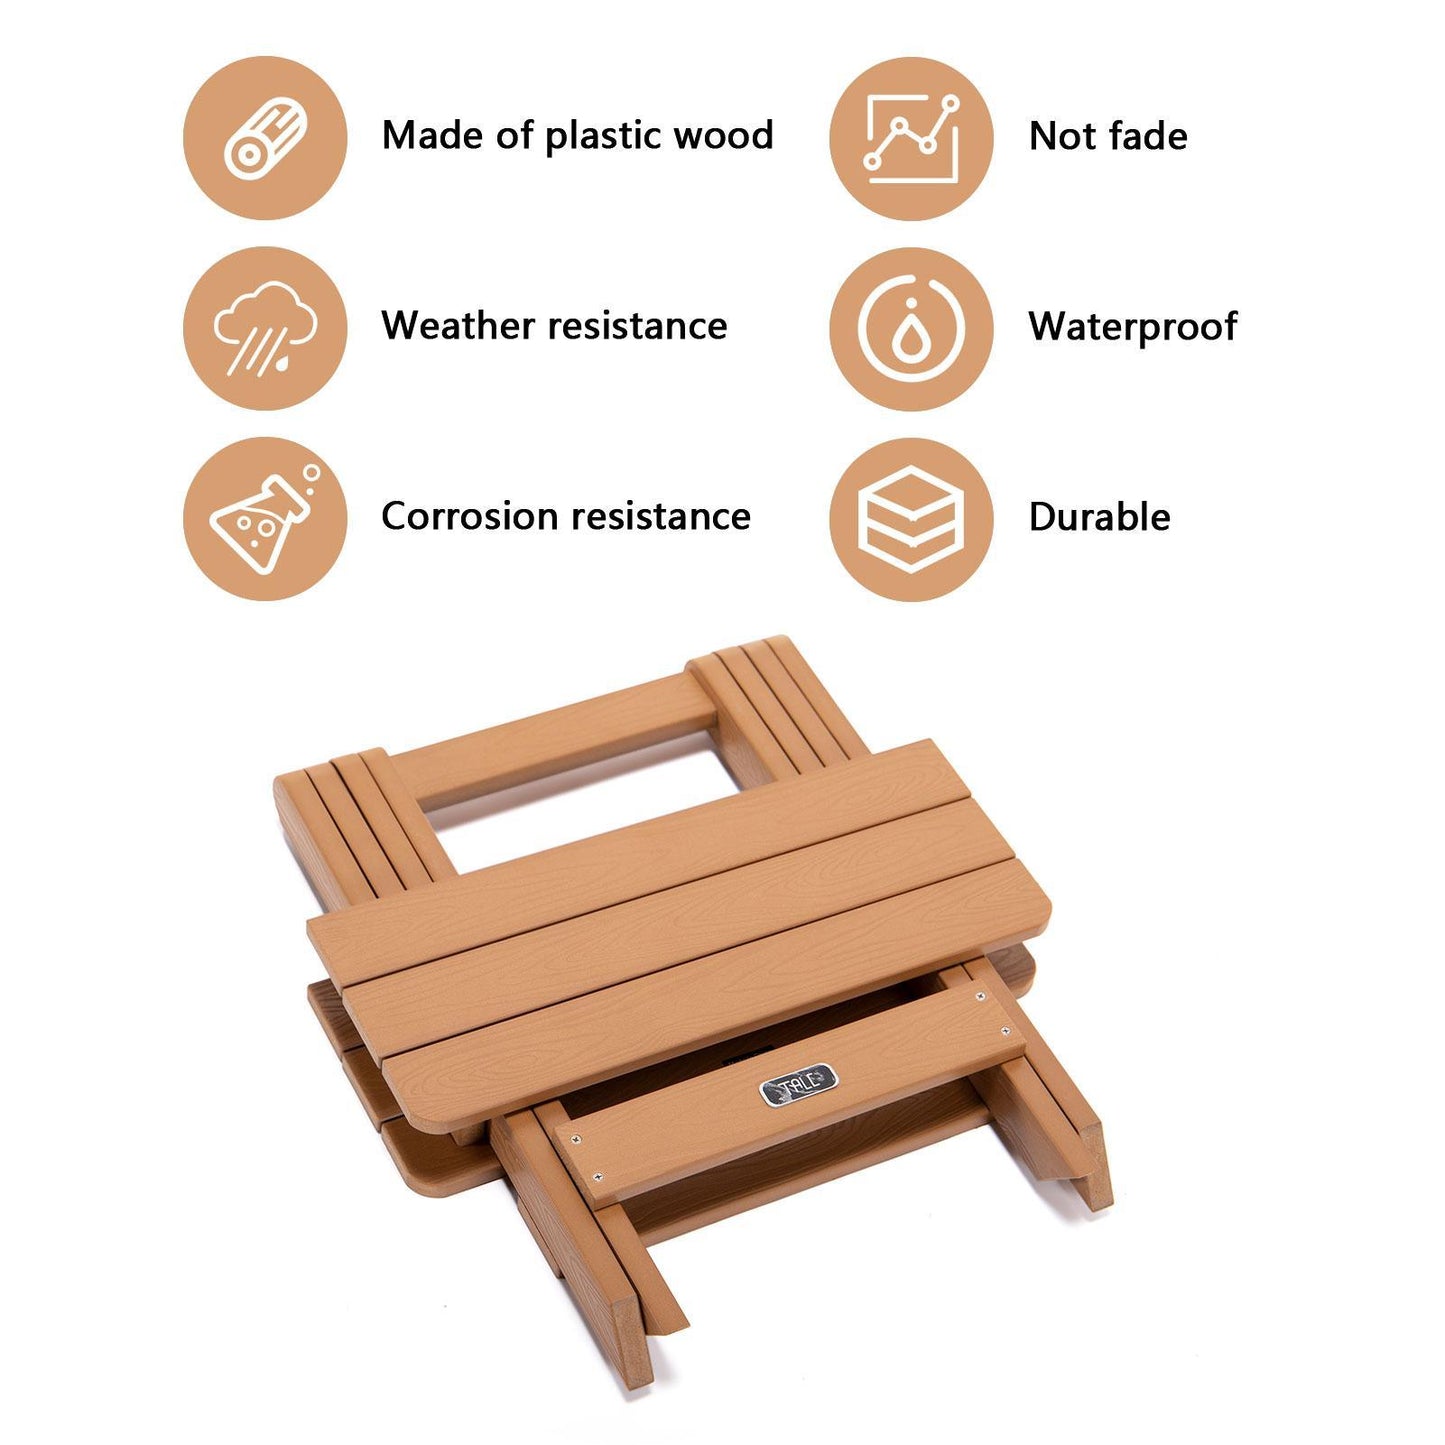 TALE Adirondack Portable Folding Side Table Square All-Weather and Fade-Resistant Plastic Wood Table Perfect for Outdoor Garden; Beach; Camping; Picnics Brown(Banned from selling on Amazon)